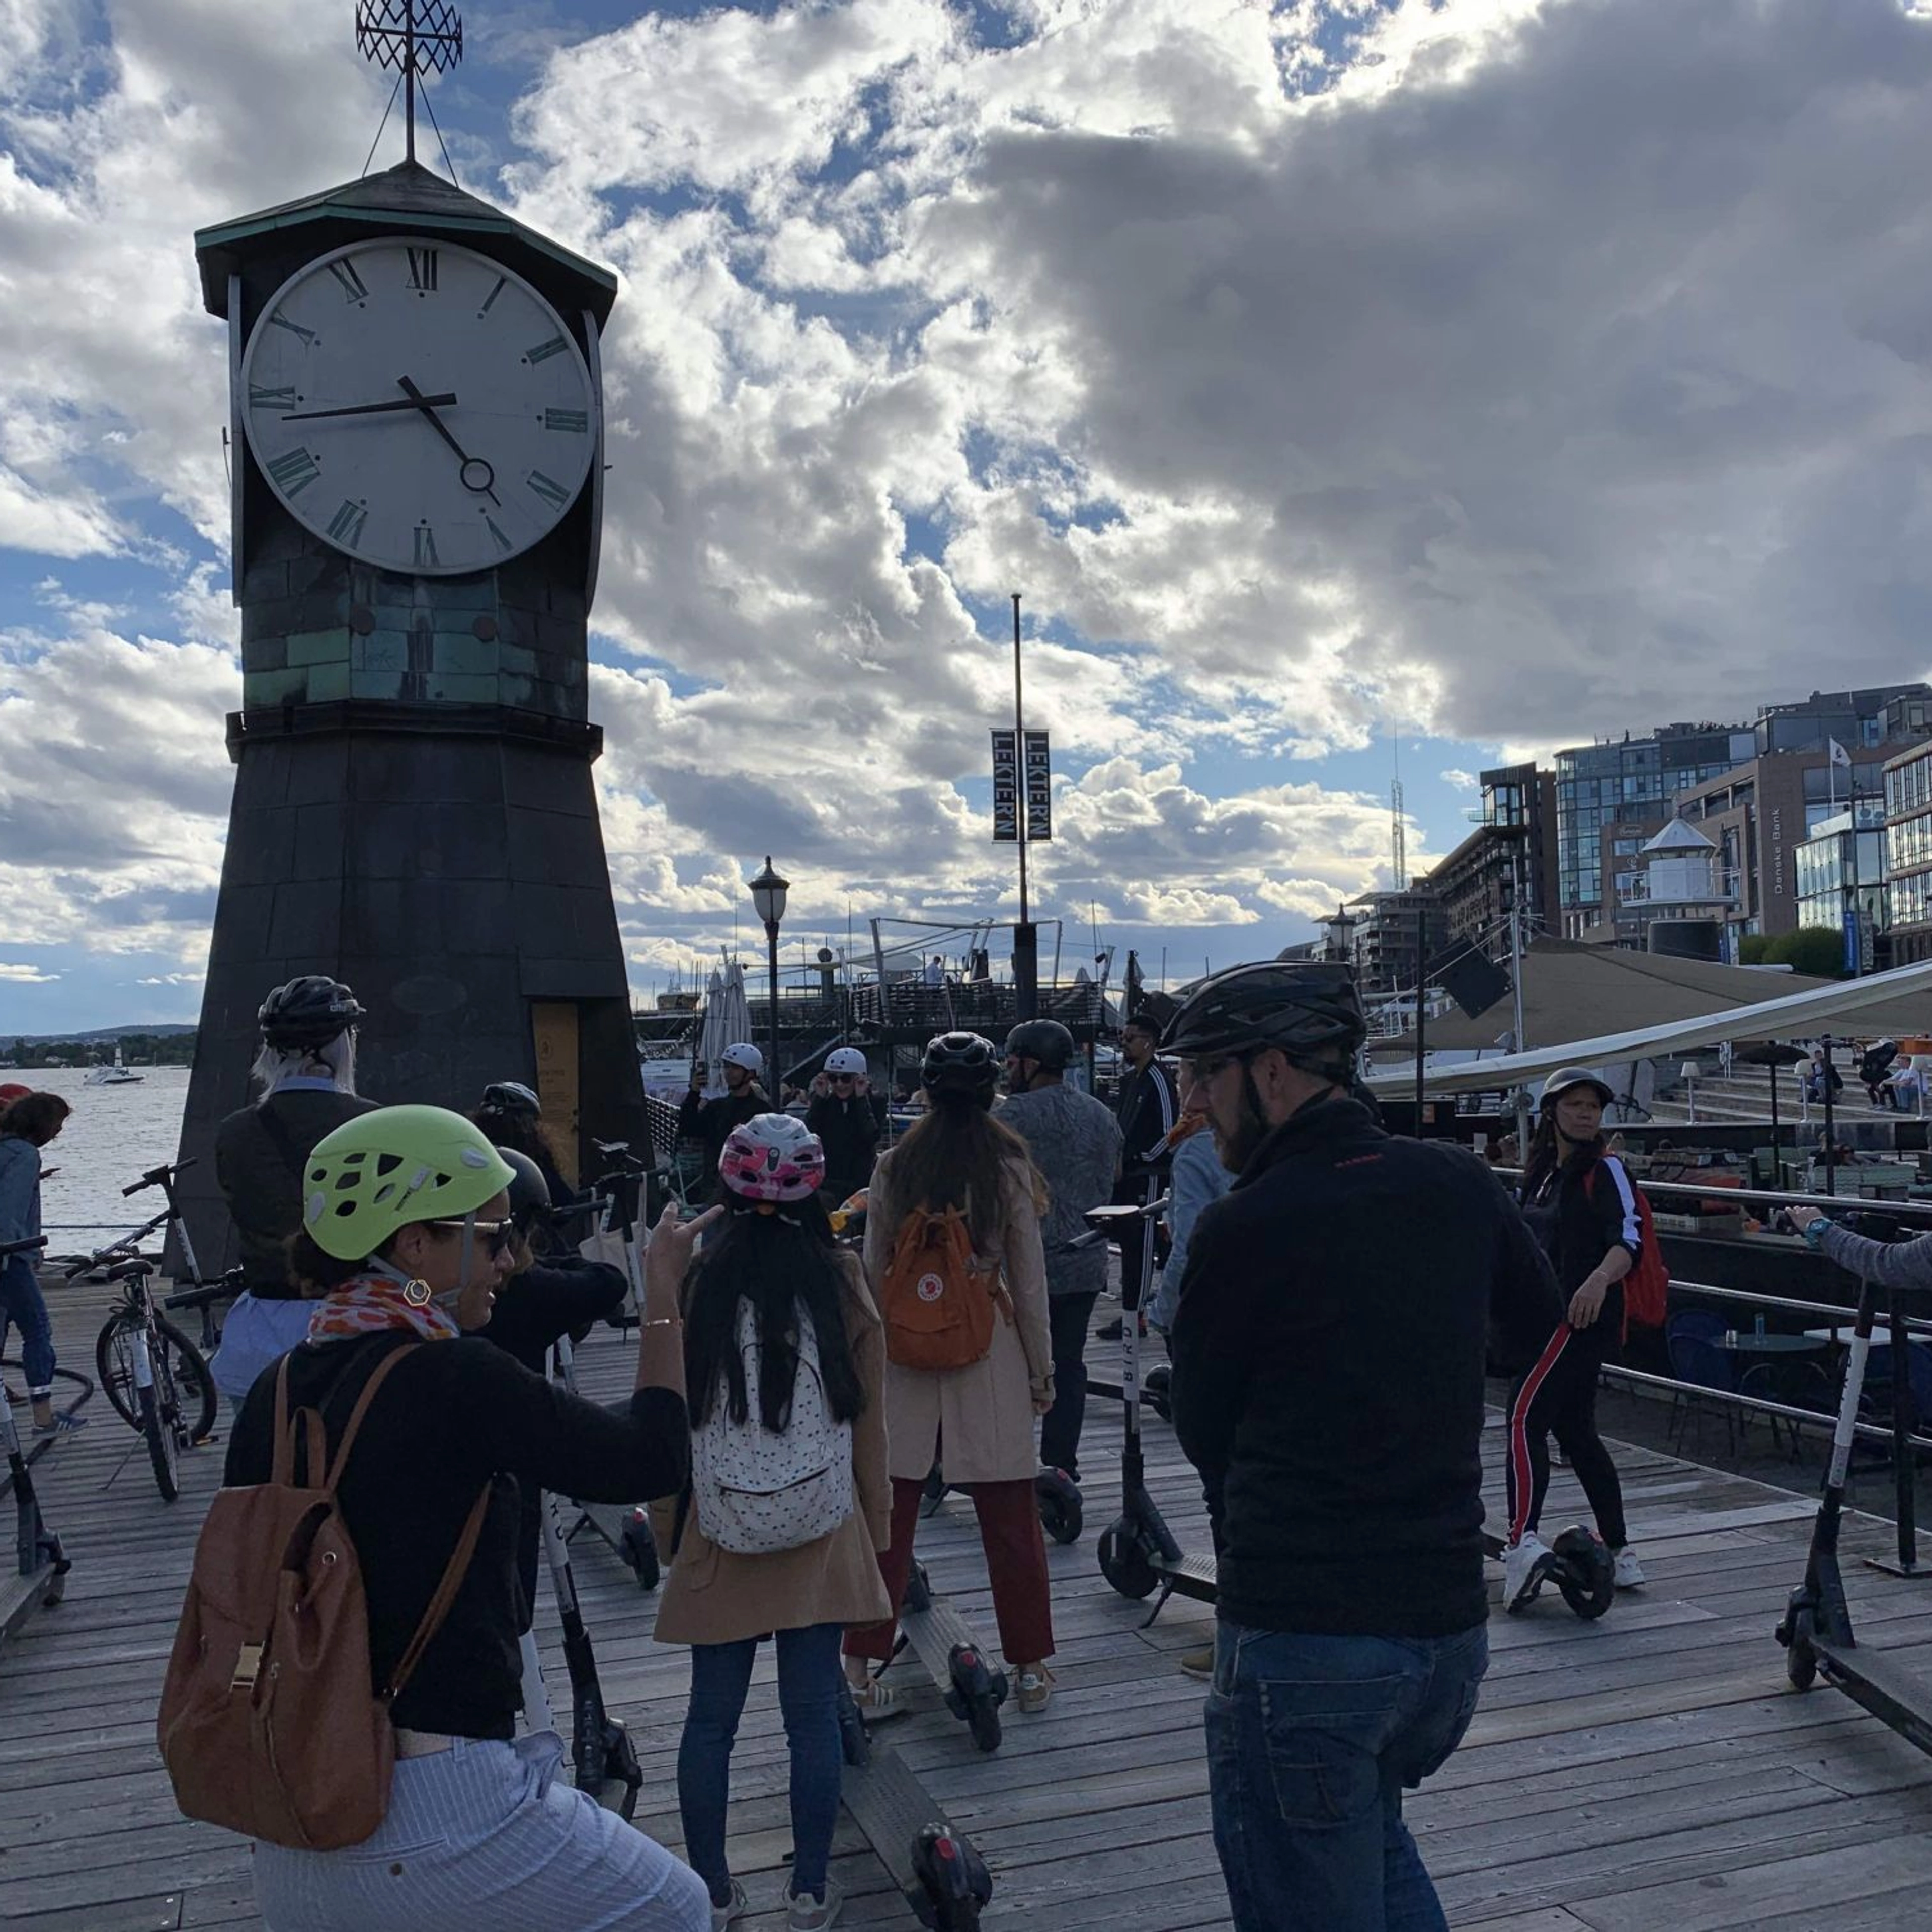 Activities in Oslo - E-scooter tour in Oslo, Aker Brygge, Oslo, Norway